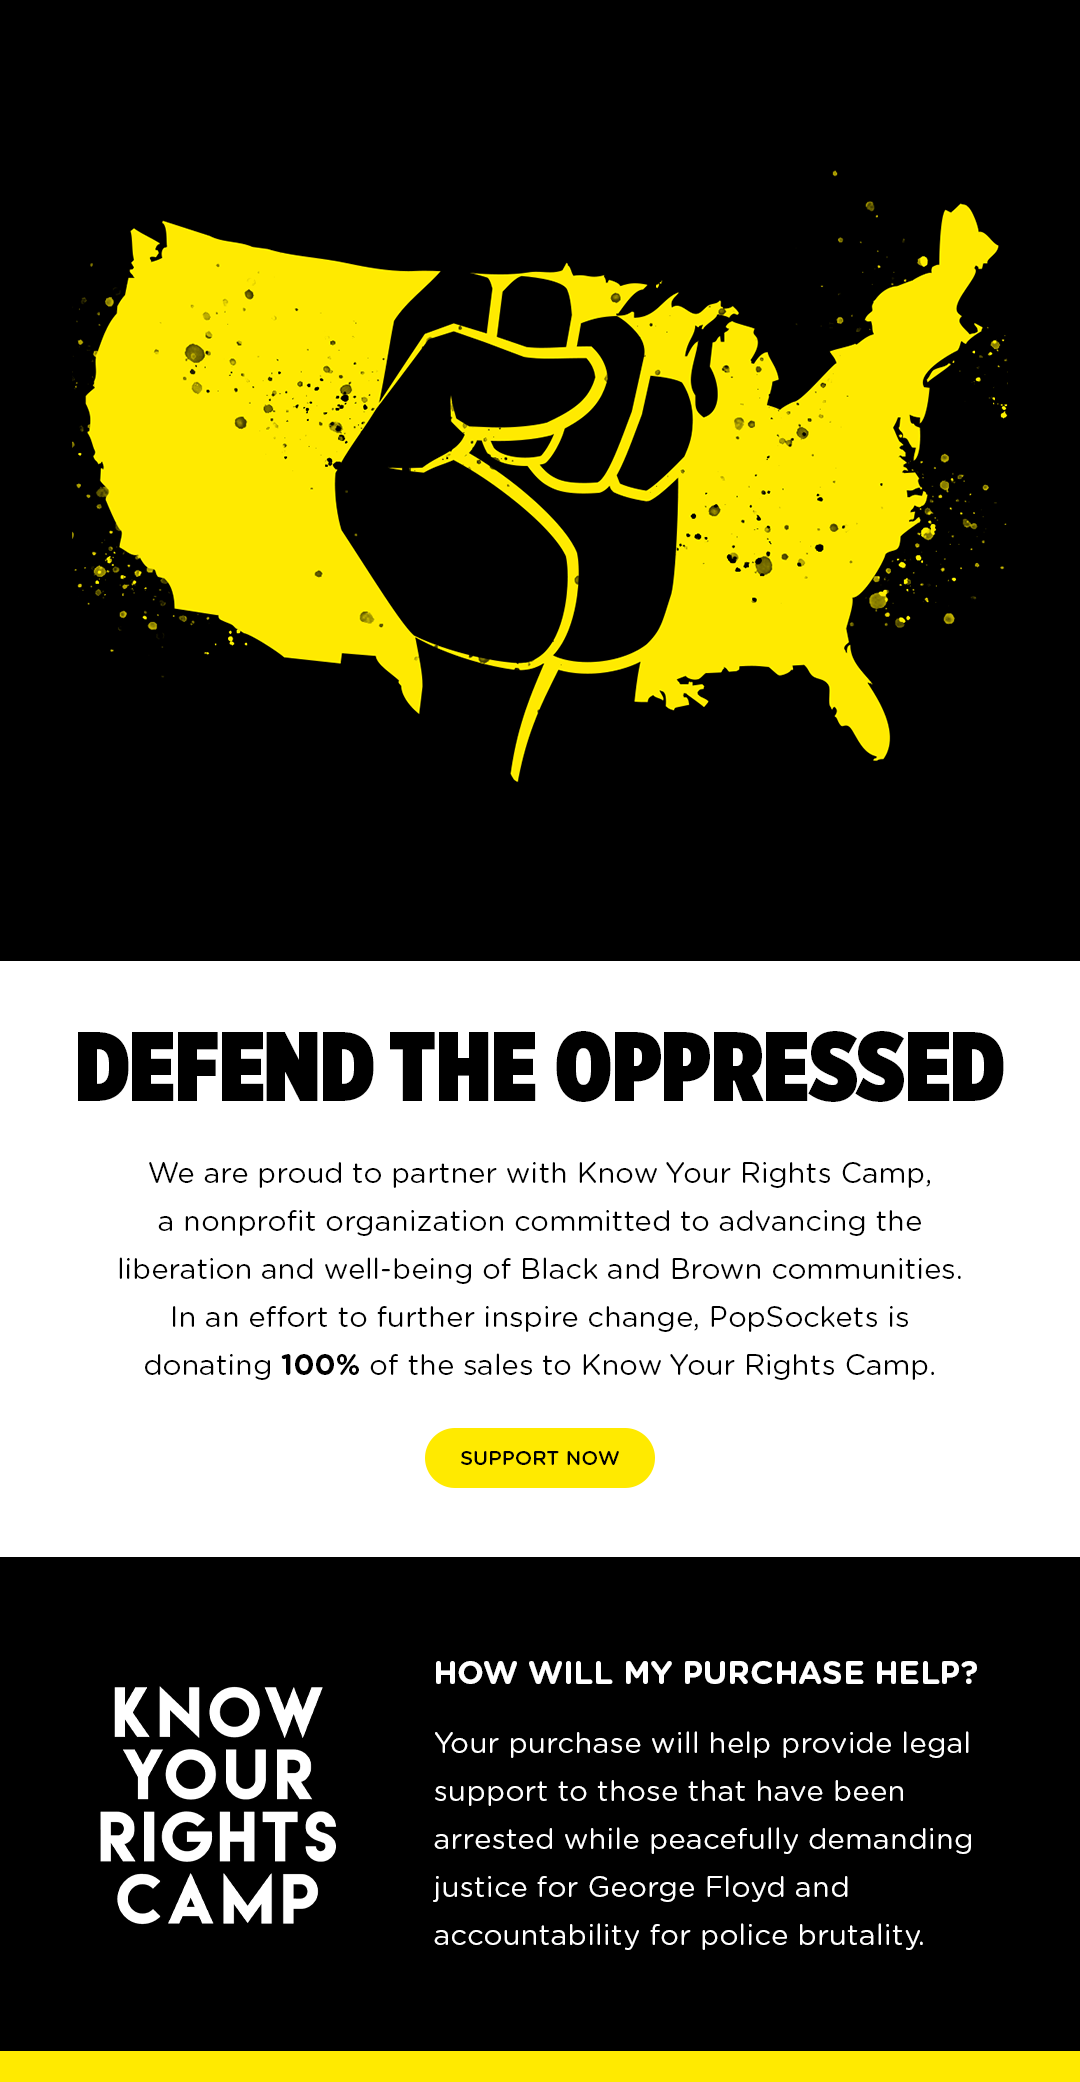 DEFEND THE OPPRESSED. we are proud to partner with Know Your Rights Camp, a nonprofit organization committed to advancing the liberation and well-being of Black and Brown Communities. In an effort to further inspire change, PopSockets is donating 100% of sales to to know Your Rights Camp